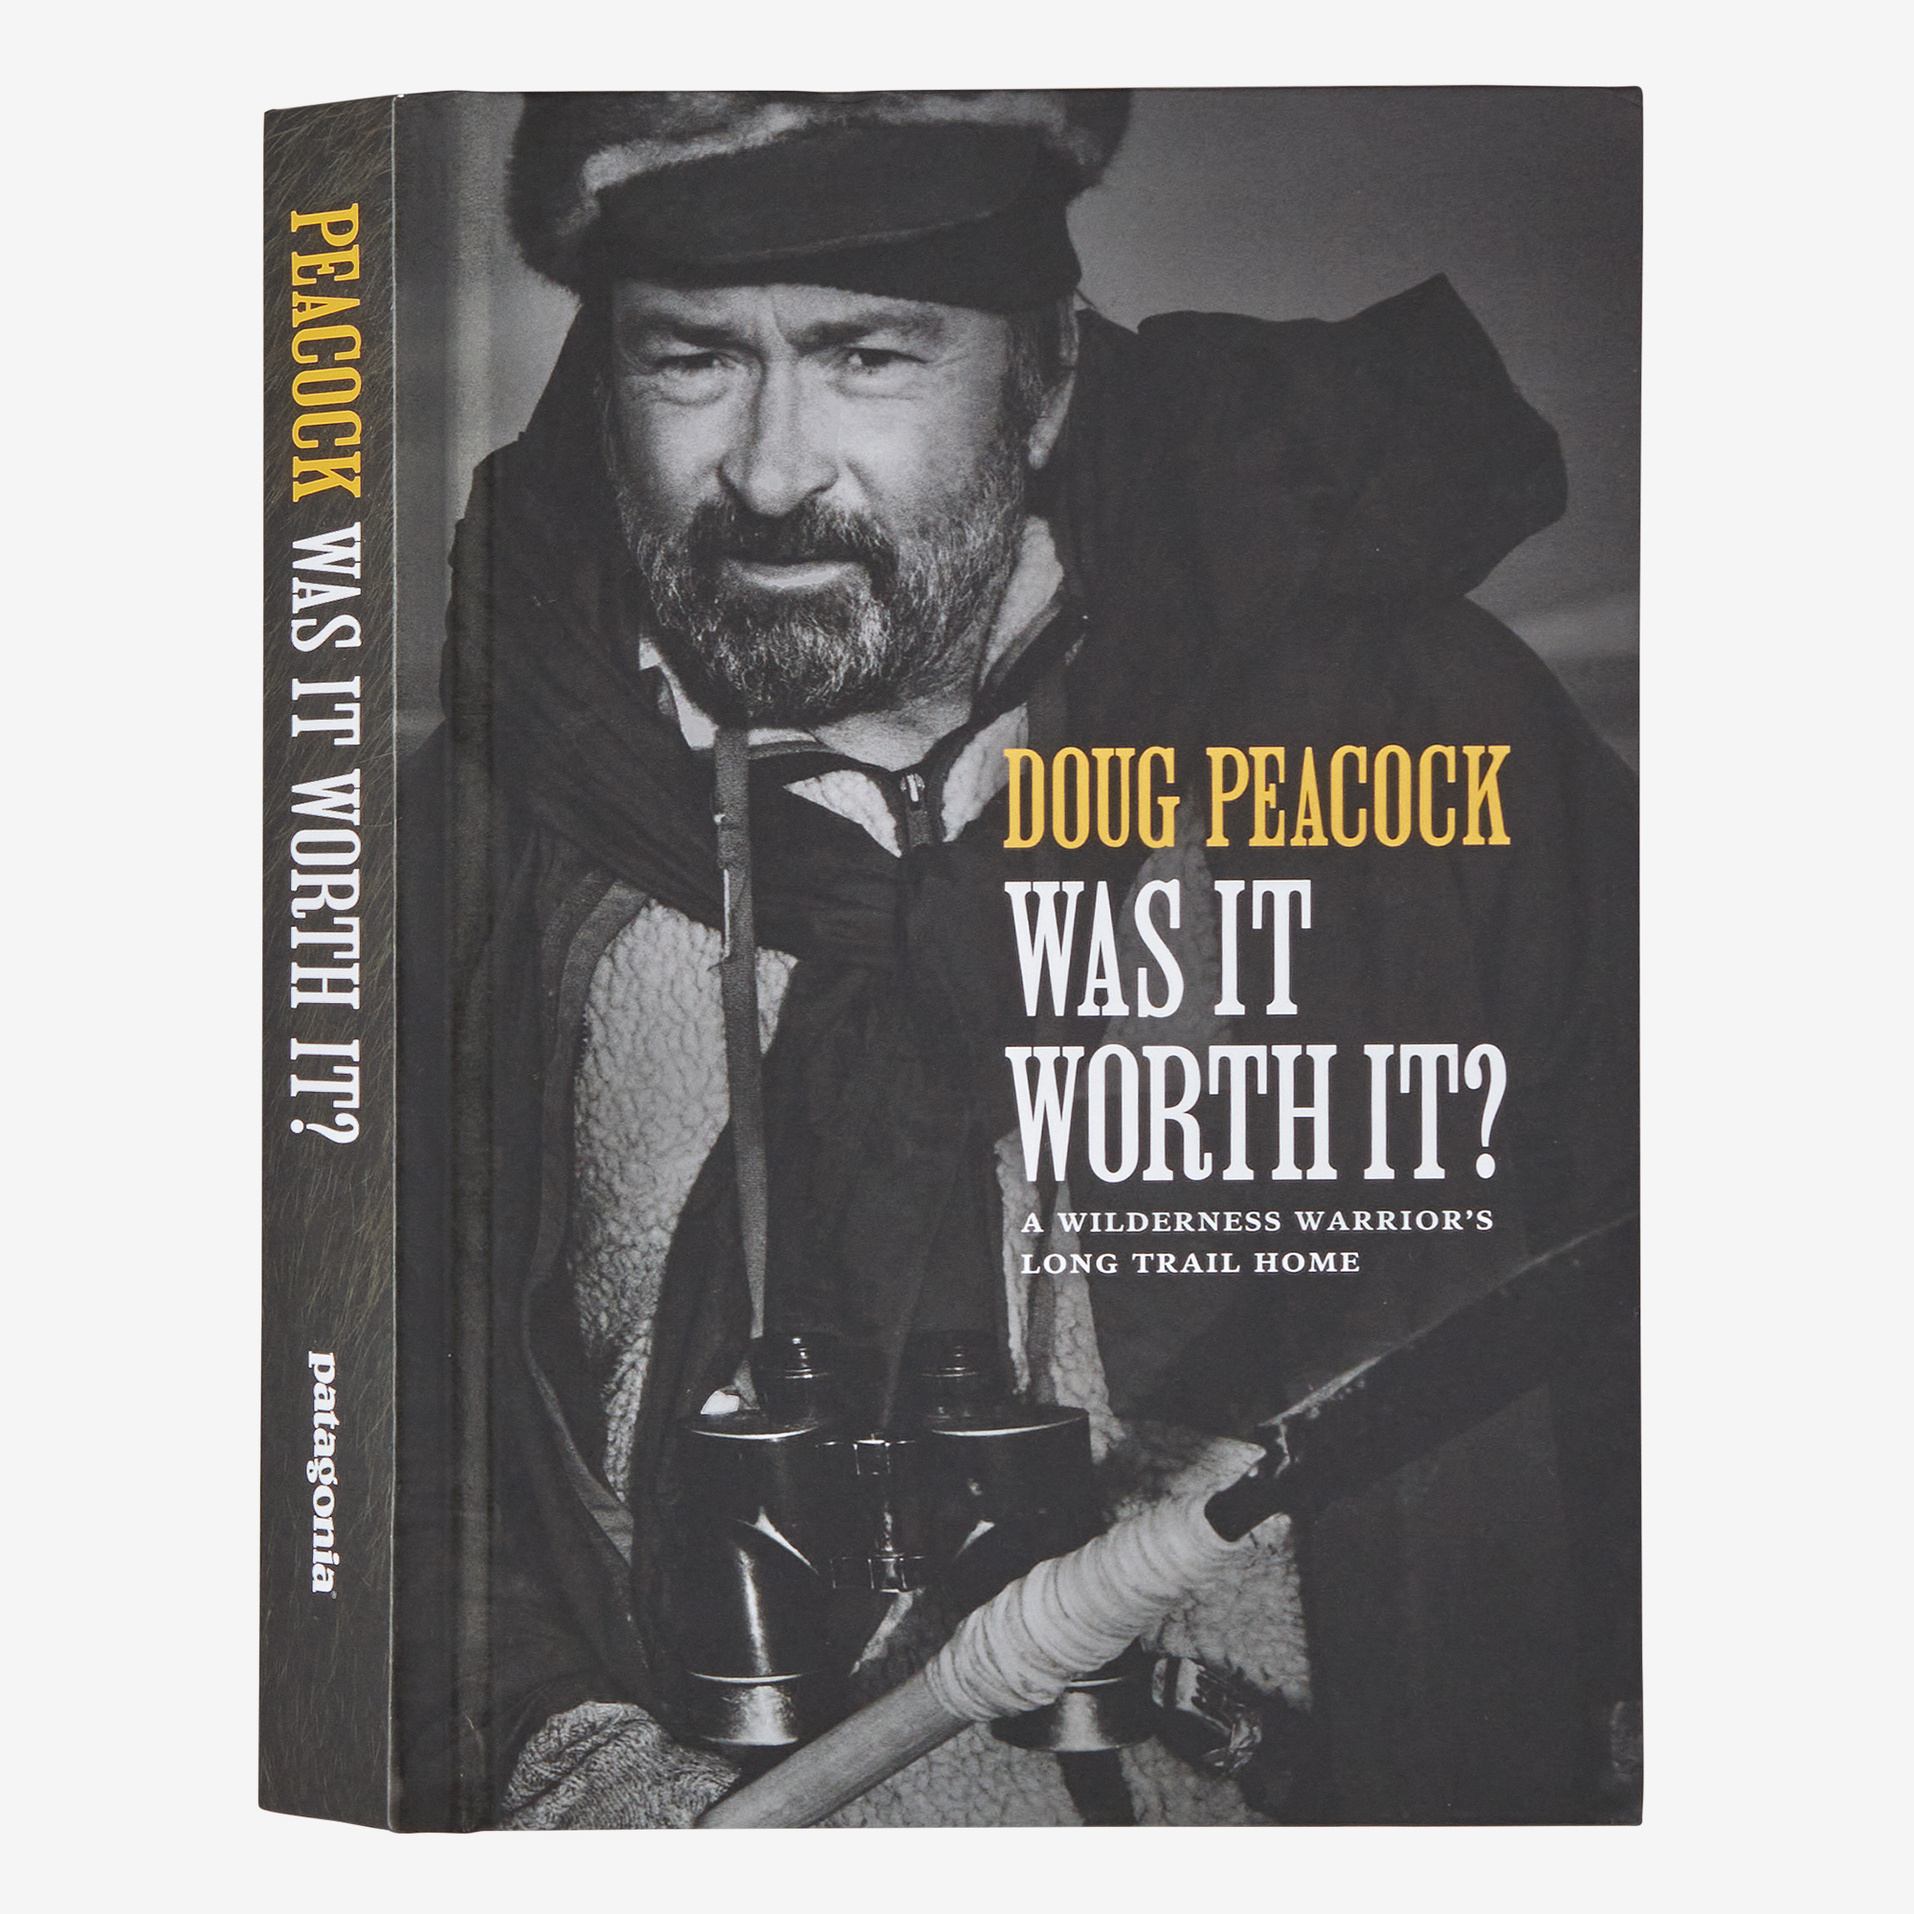 Doug Peacock, Was It Worth It? A Wilderness Warrior’s Long Trail Home (book cover)